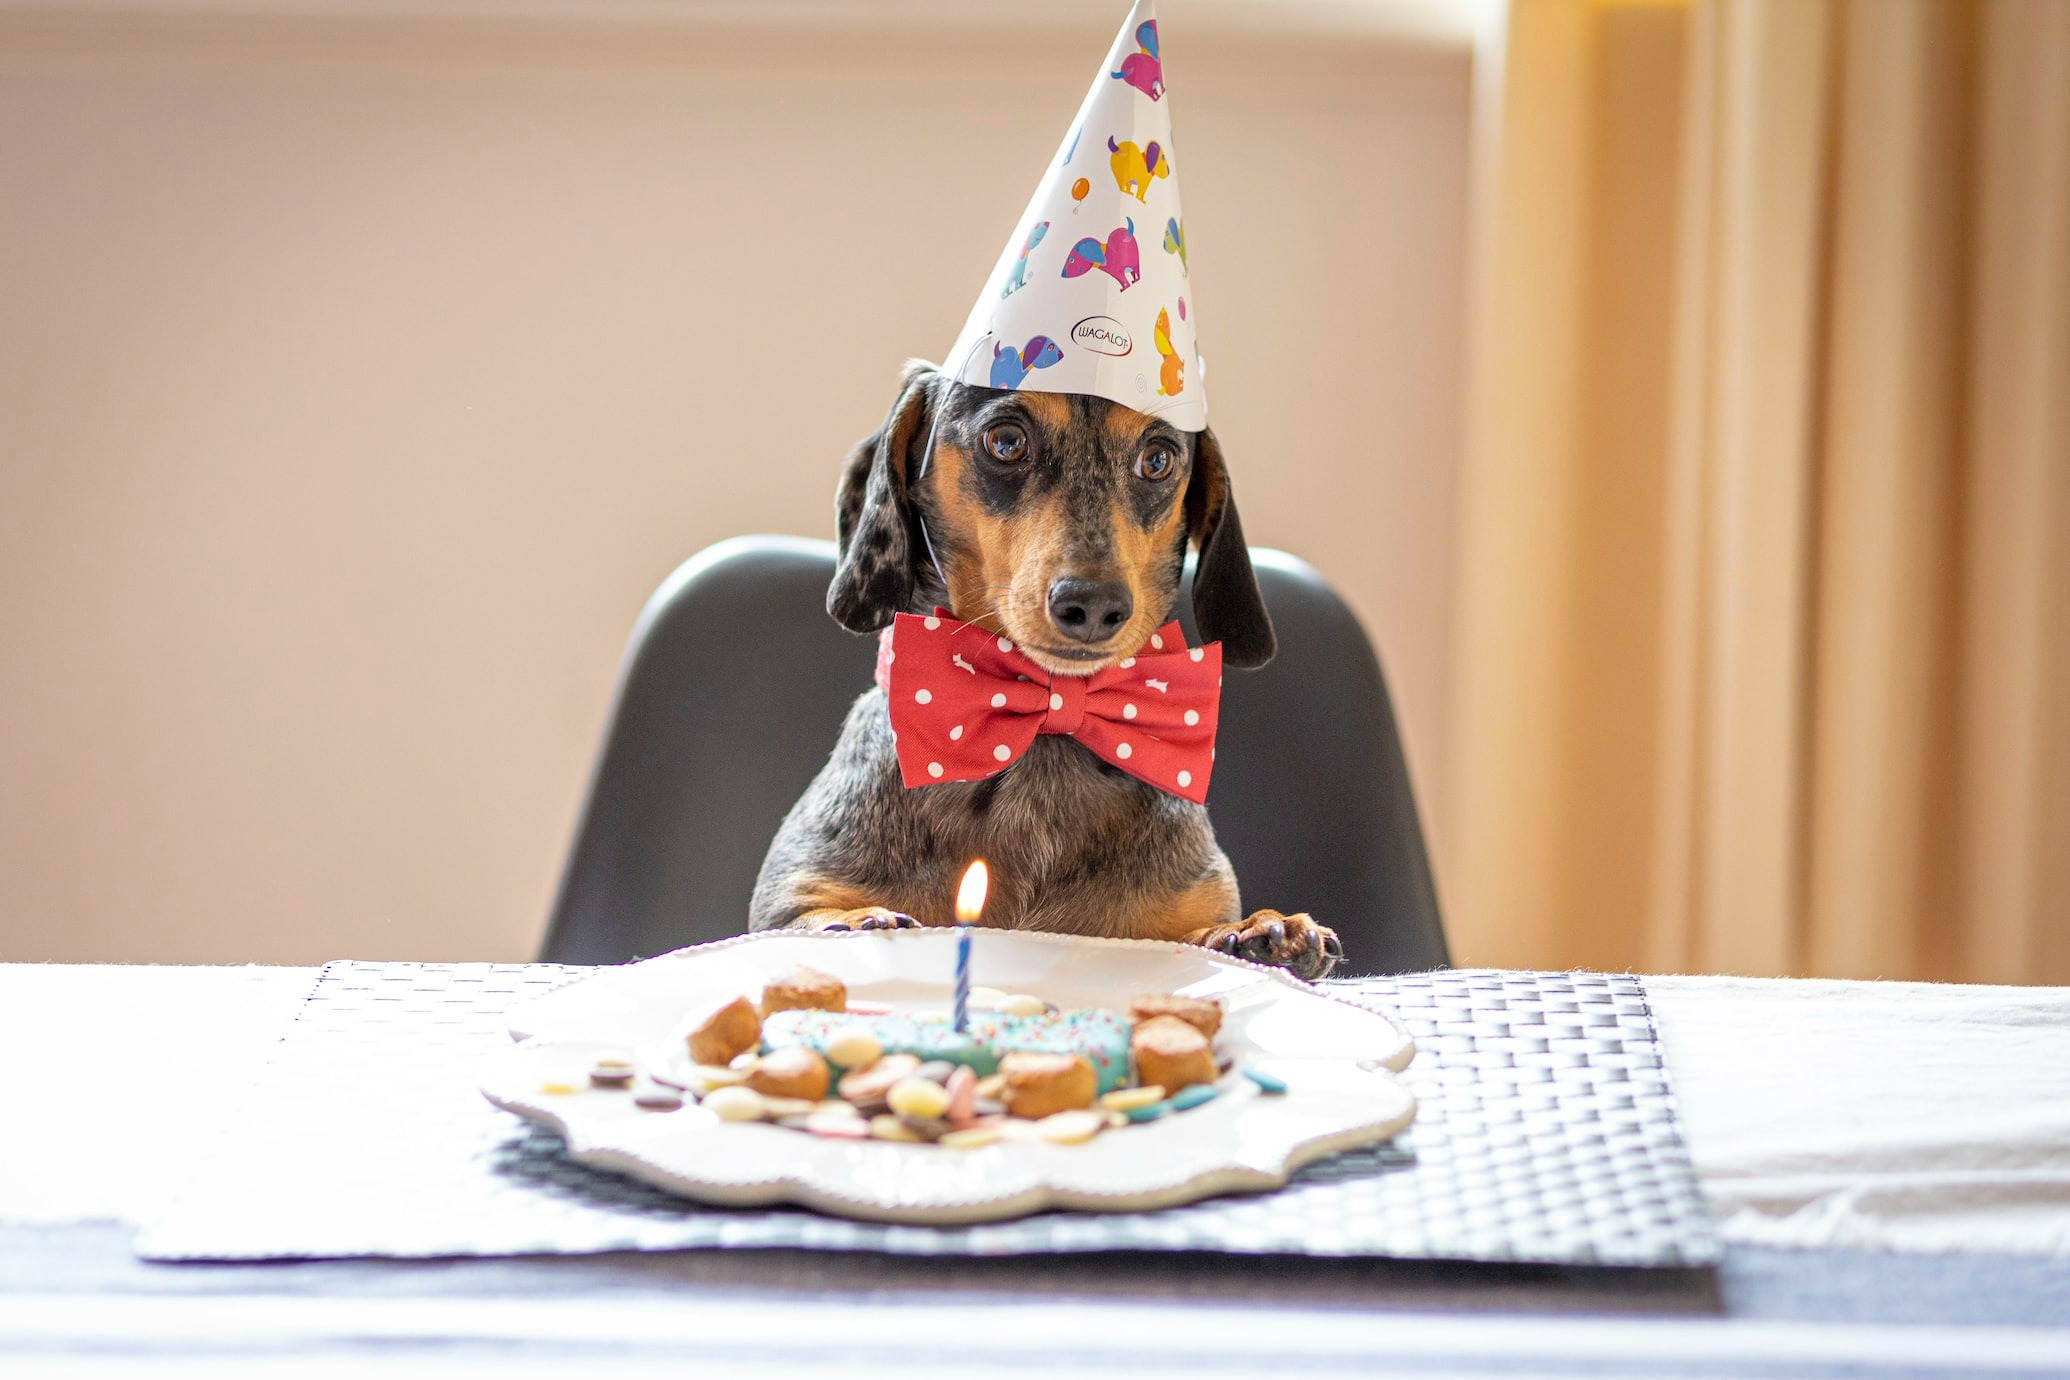 small dog with hat and special dog-safe cake for the birthday celebration